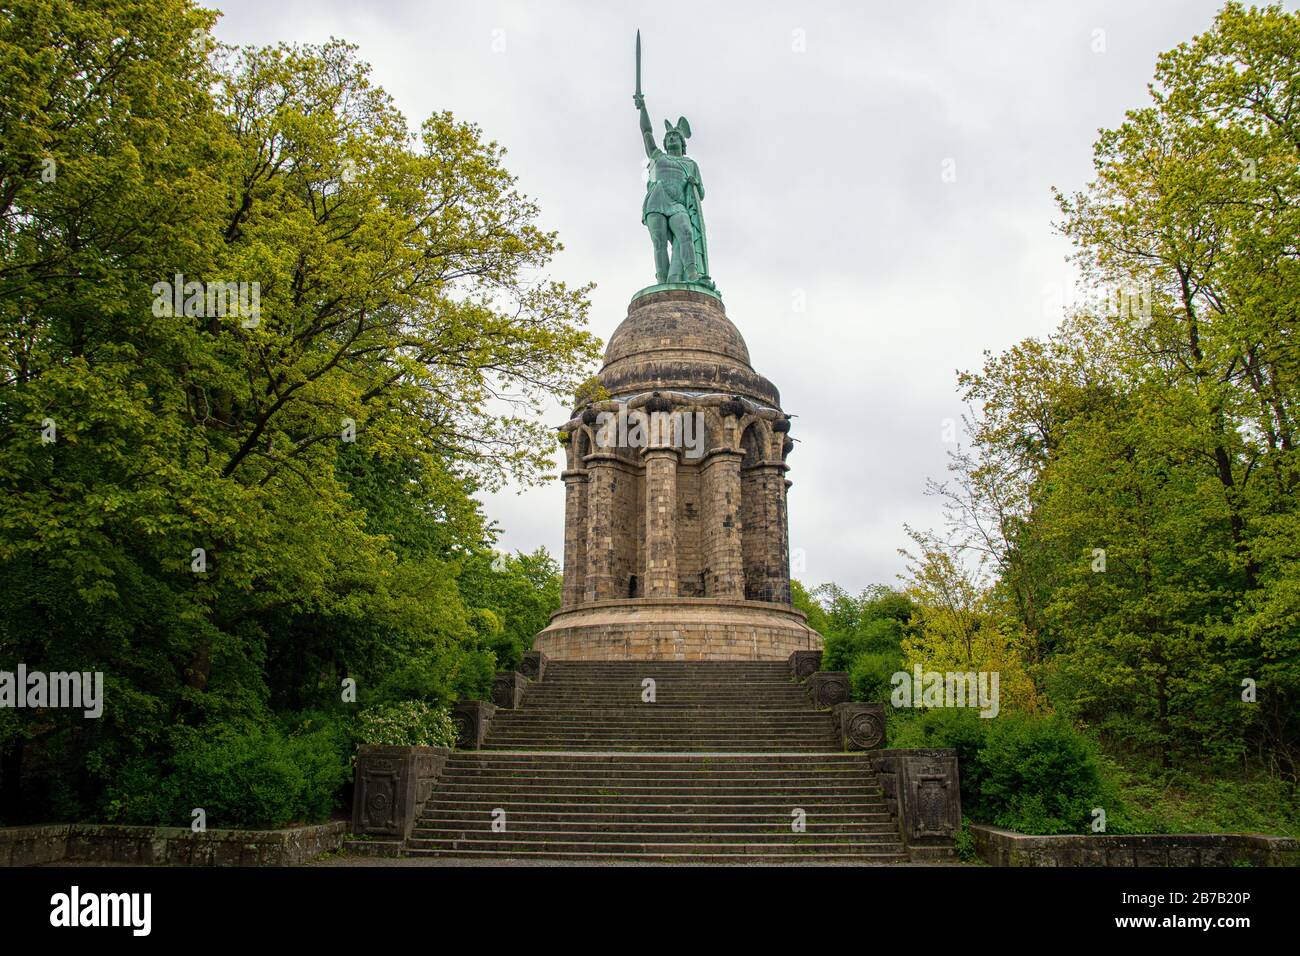 The Hermann Monument in the Teutoburg Forest near Detmold, Germany Stock Photo